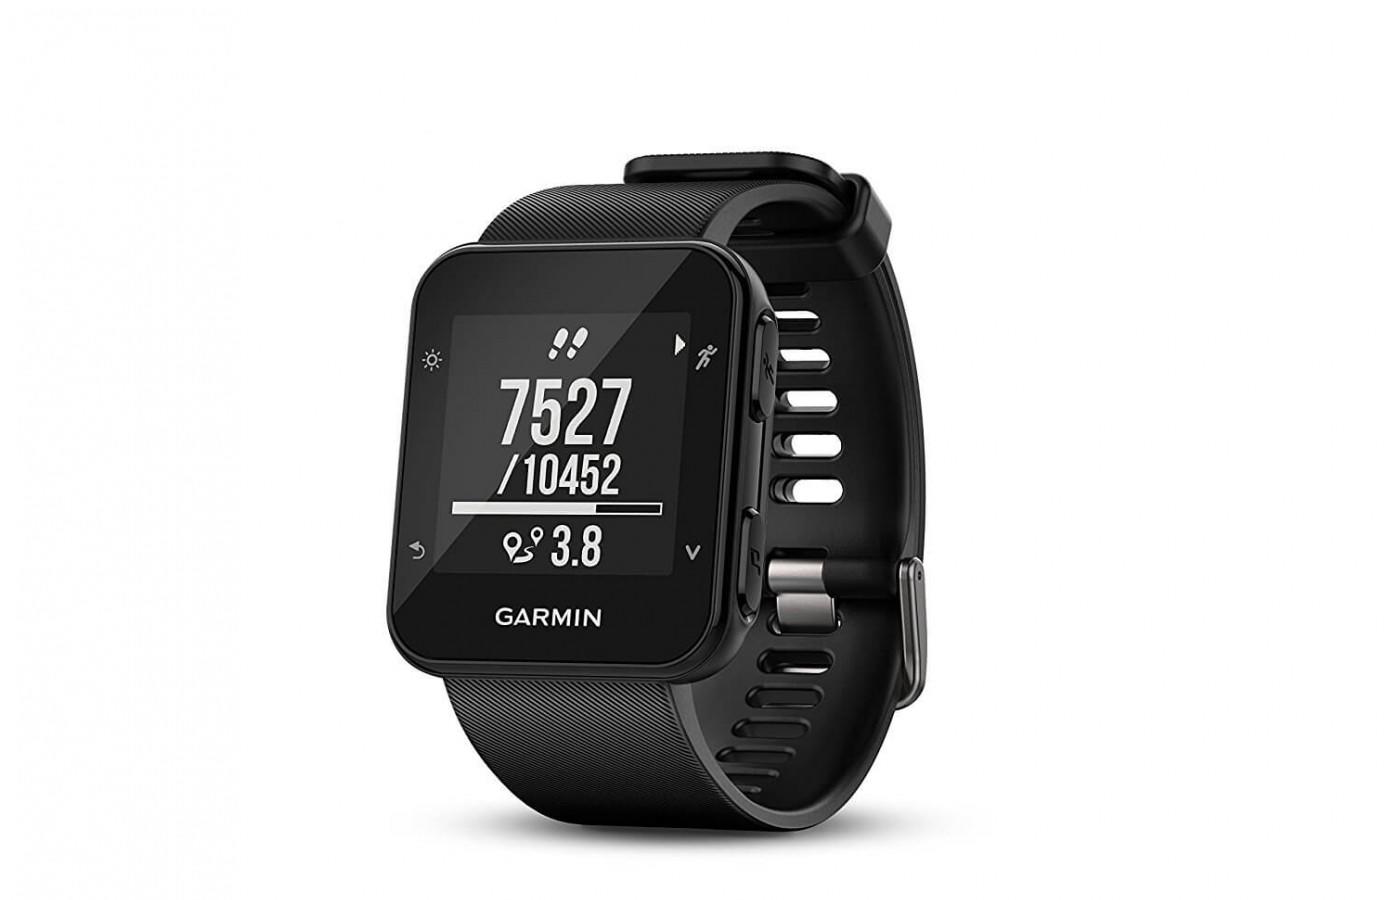 The Garmin Forerunner 35 allows the wearer to track and upload data